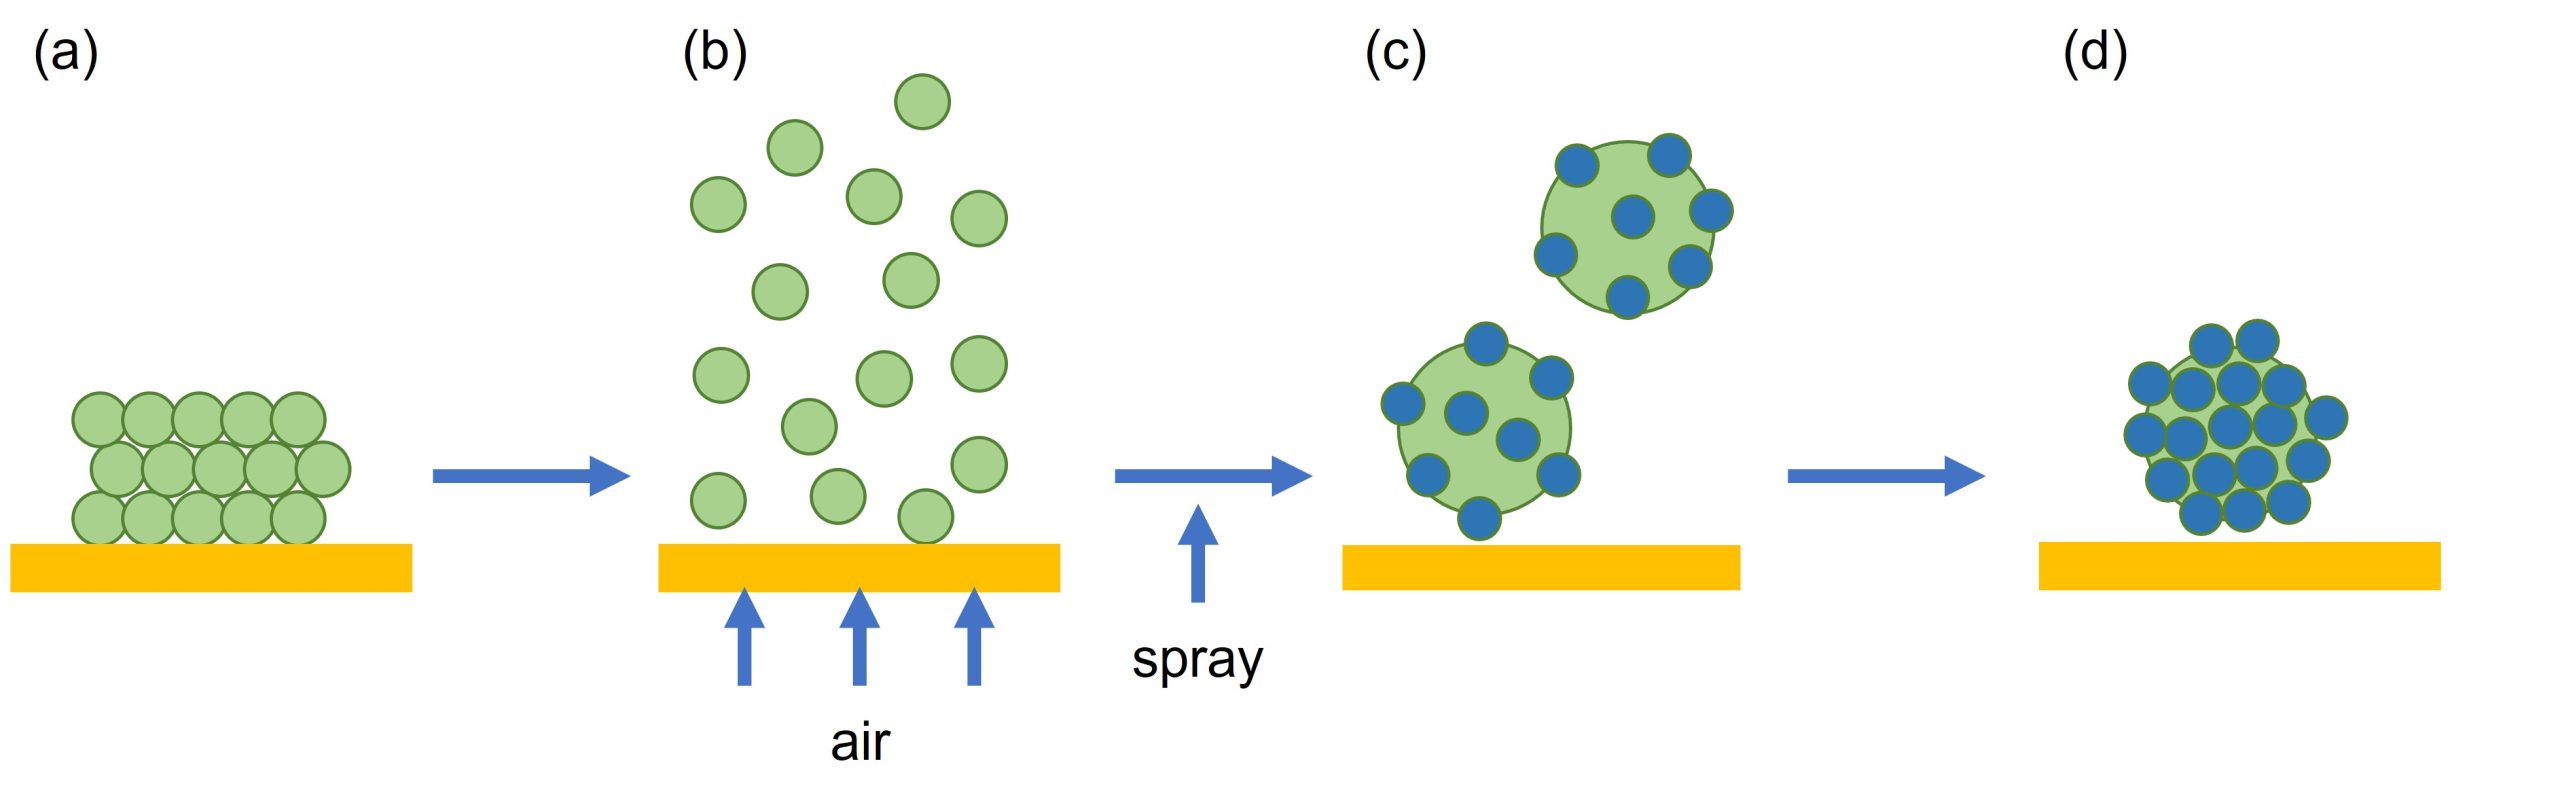 schematic to show key stages during fluid-bed mediated particle coating 